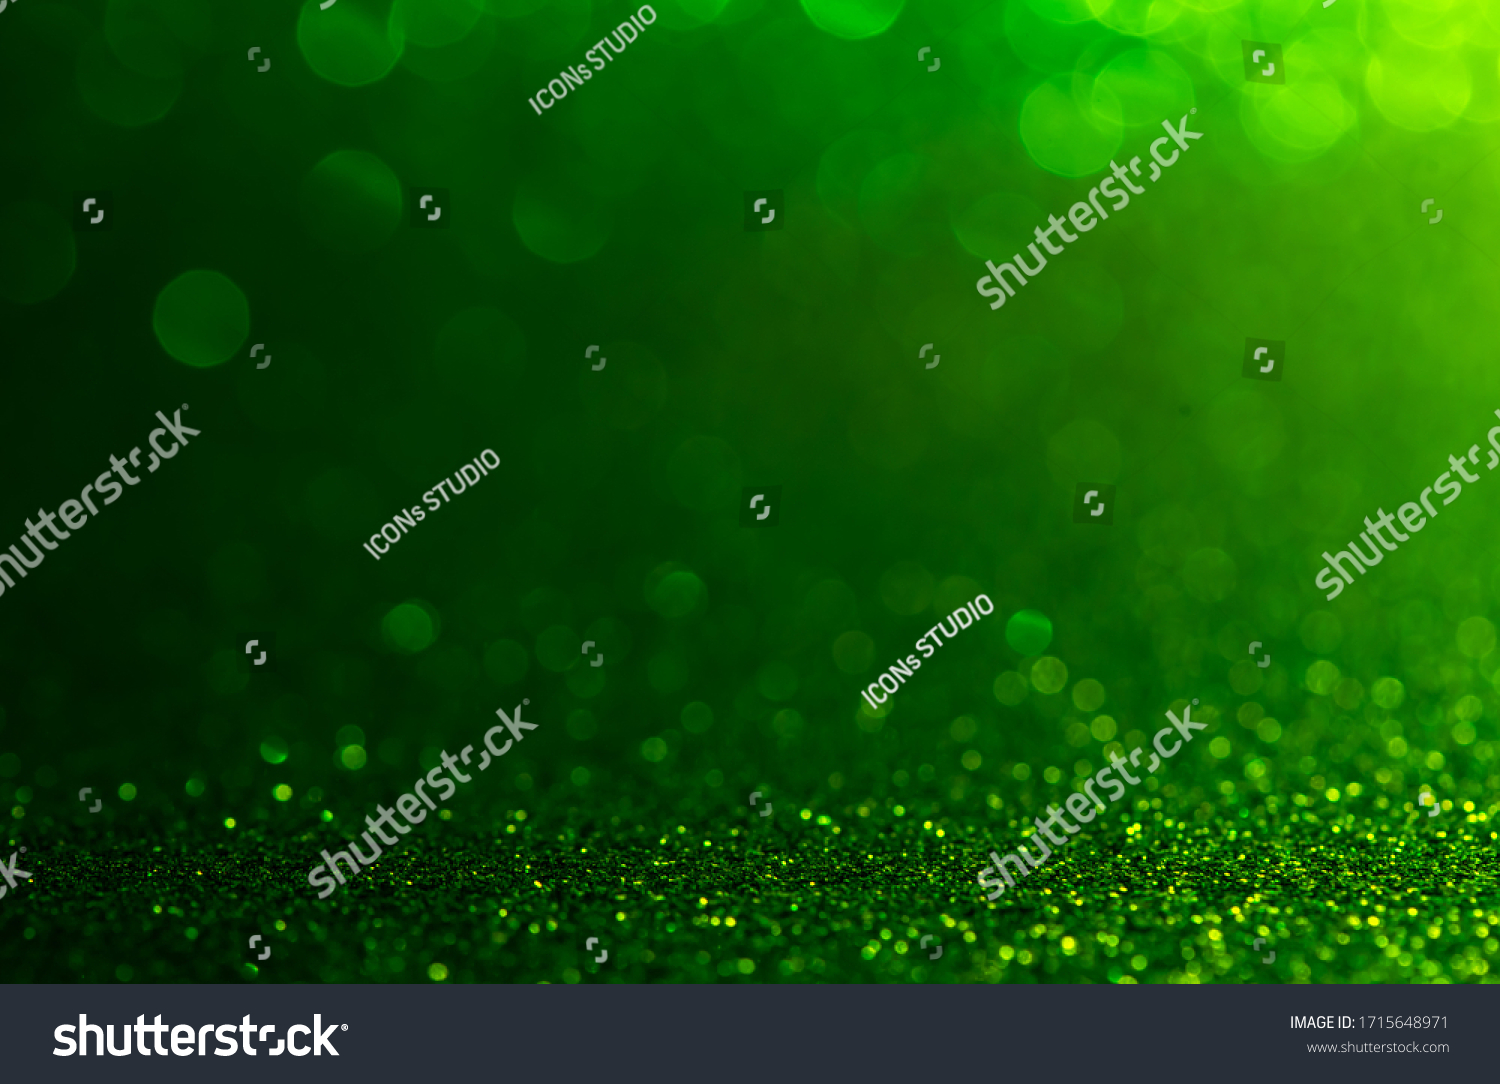 green Sparkling Lights Festive background with texture. Abstract Christmas twinkled bright bokeh defocused #1715648971